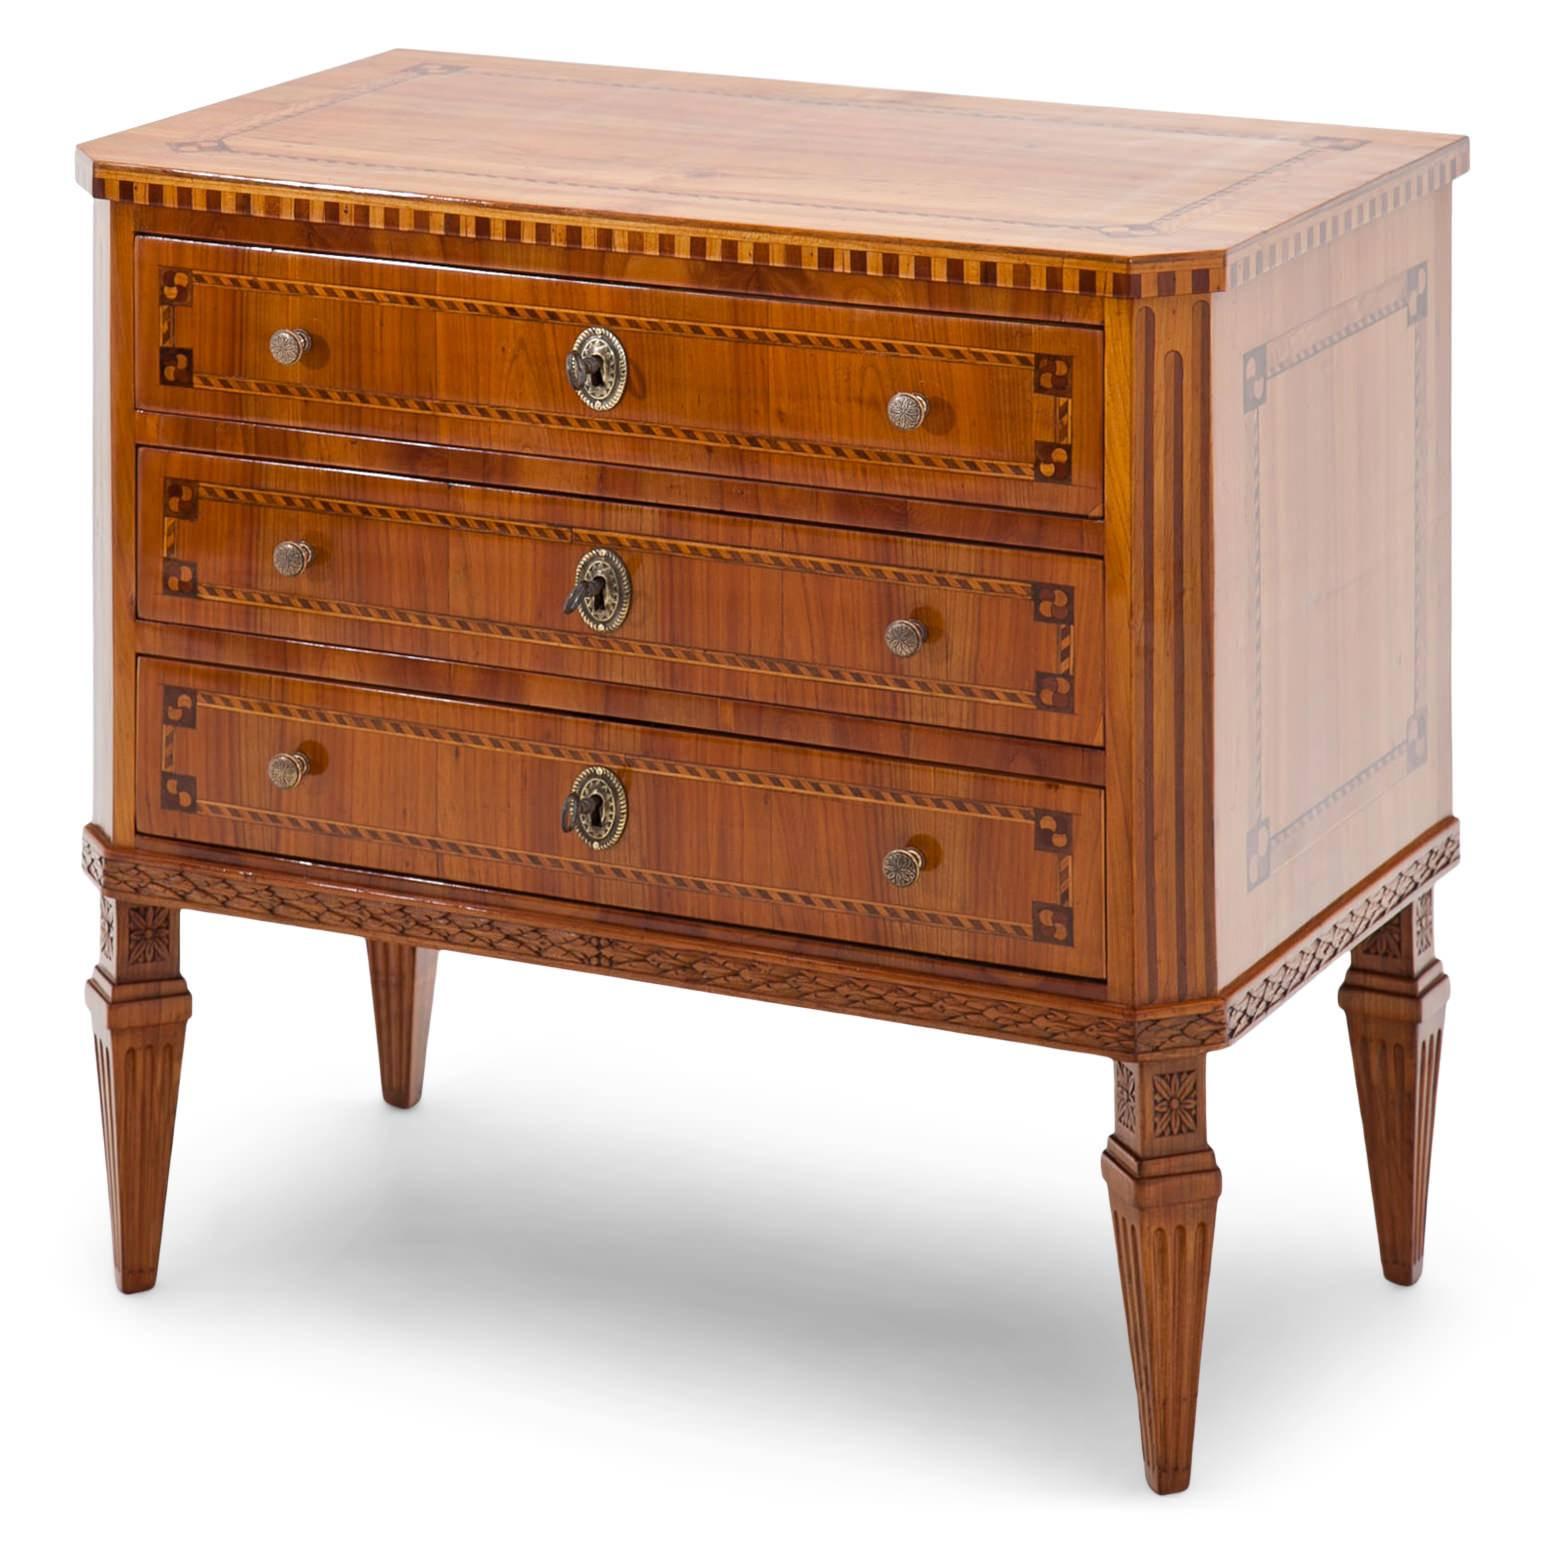 Louis Seize-Style Chest of Drawers, 19th Century (19. Jahrhundert)